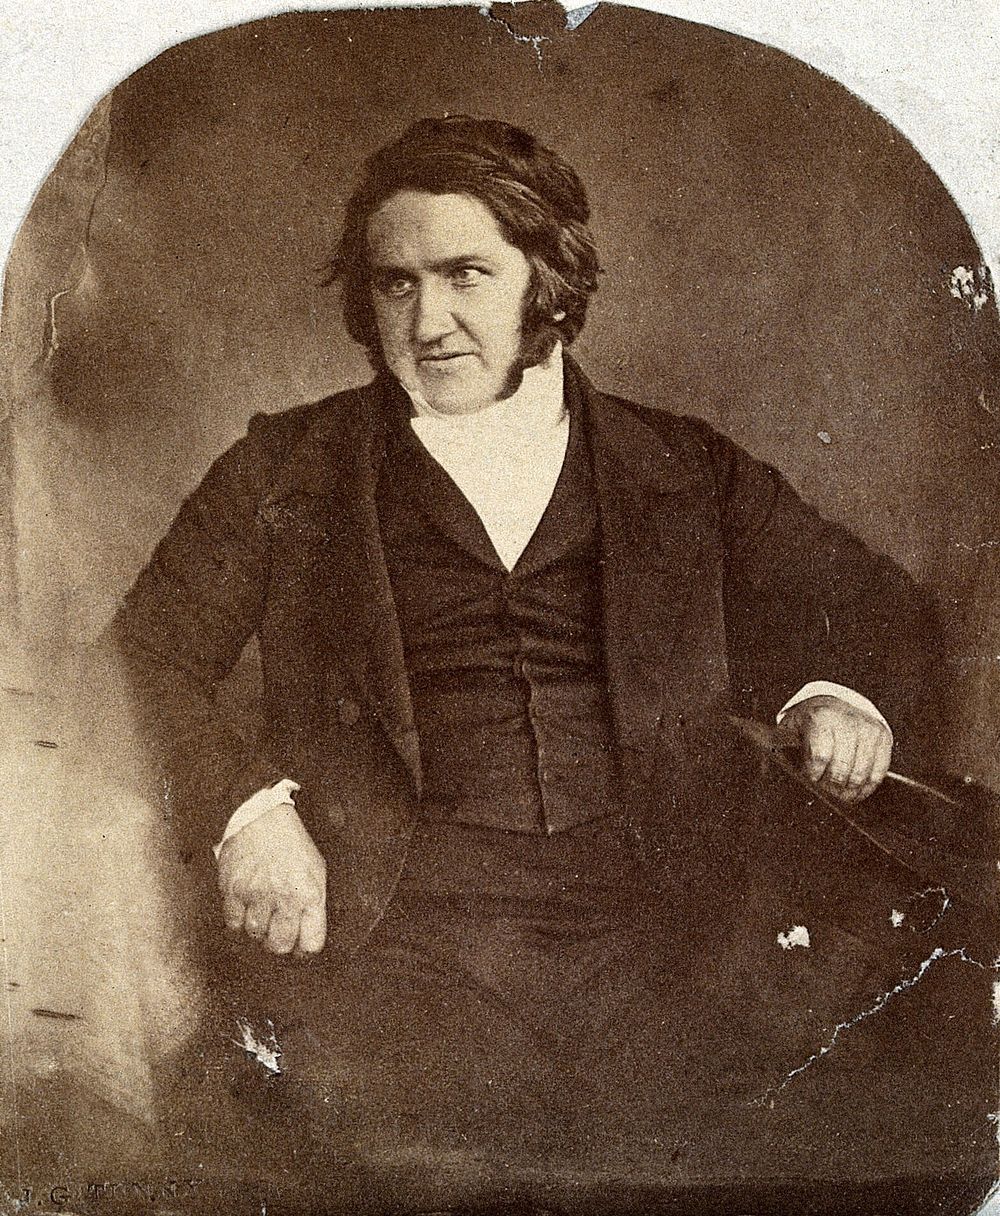 Sir James Young Simpson. Photograph by J.G. Tunny.